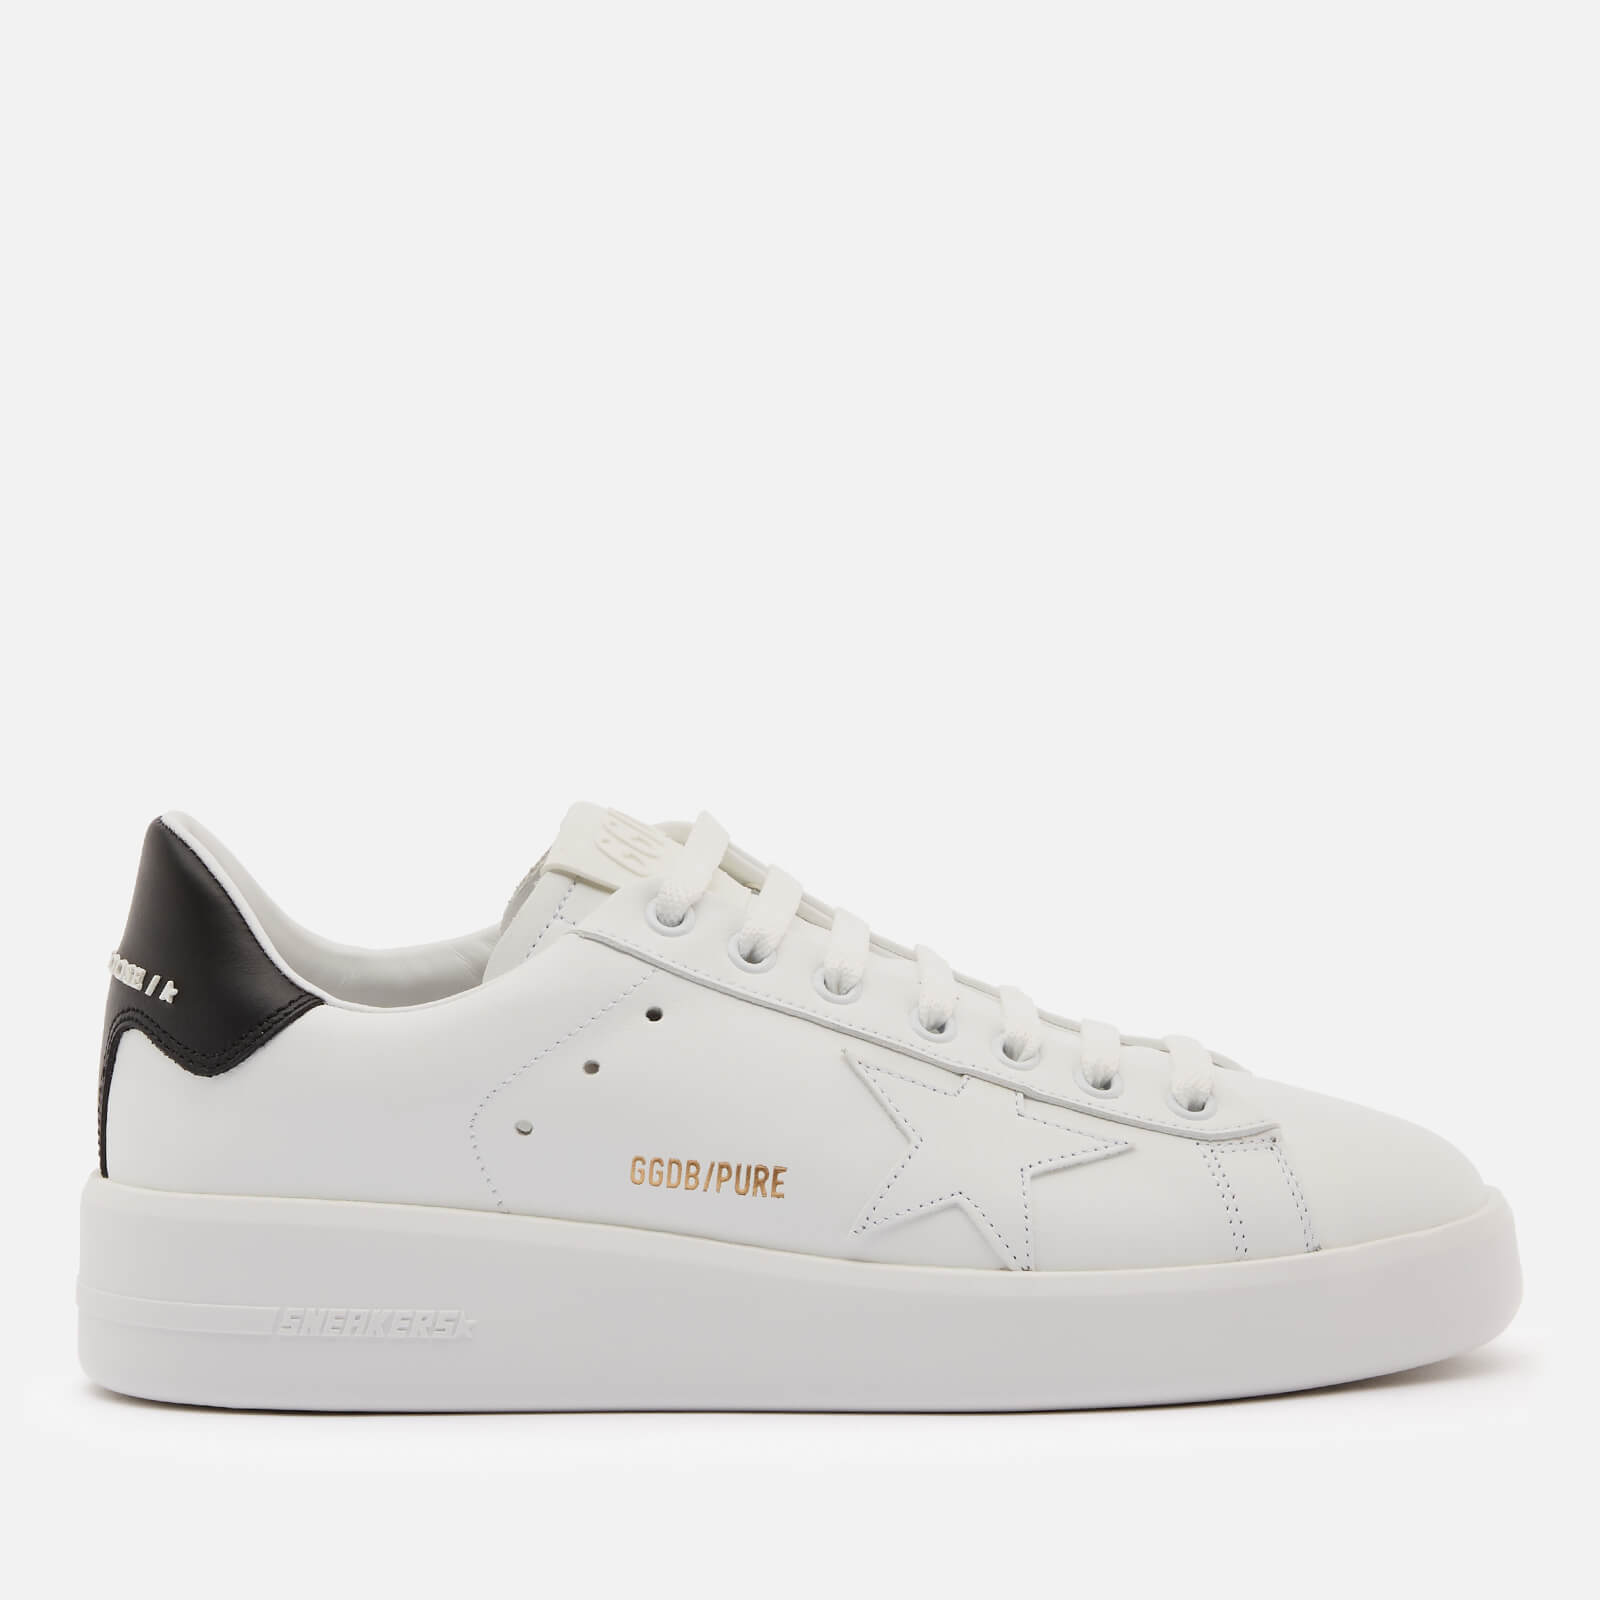 Golden Goose Women's Pure Star Chunky Leather Trainers - White/Black - UK 3